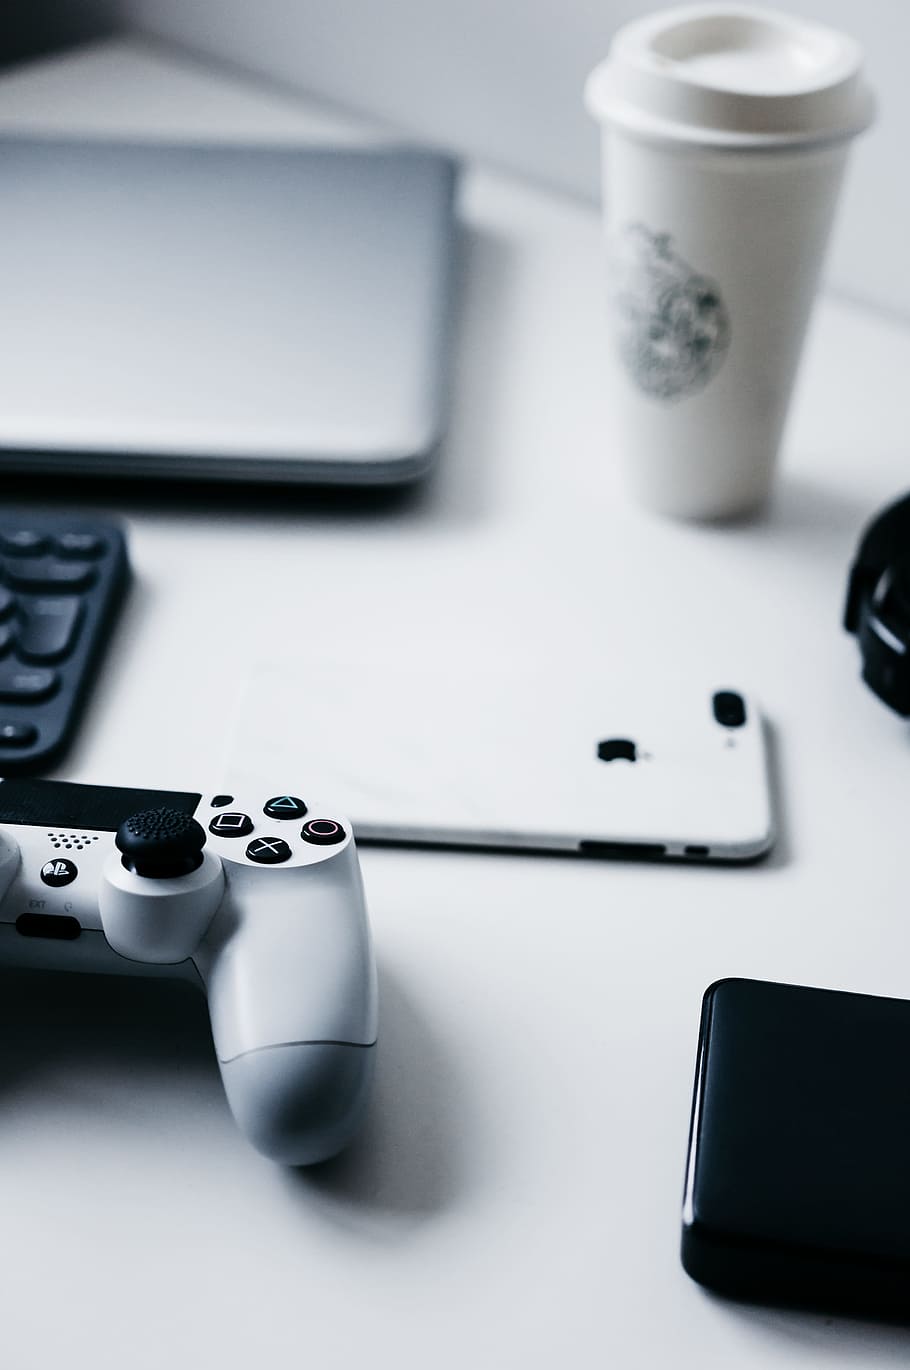 HD wallpaper: controller, phone, cup, laptop, ps playstation